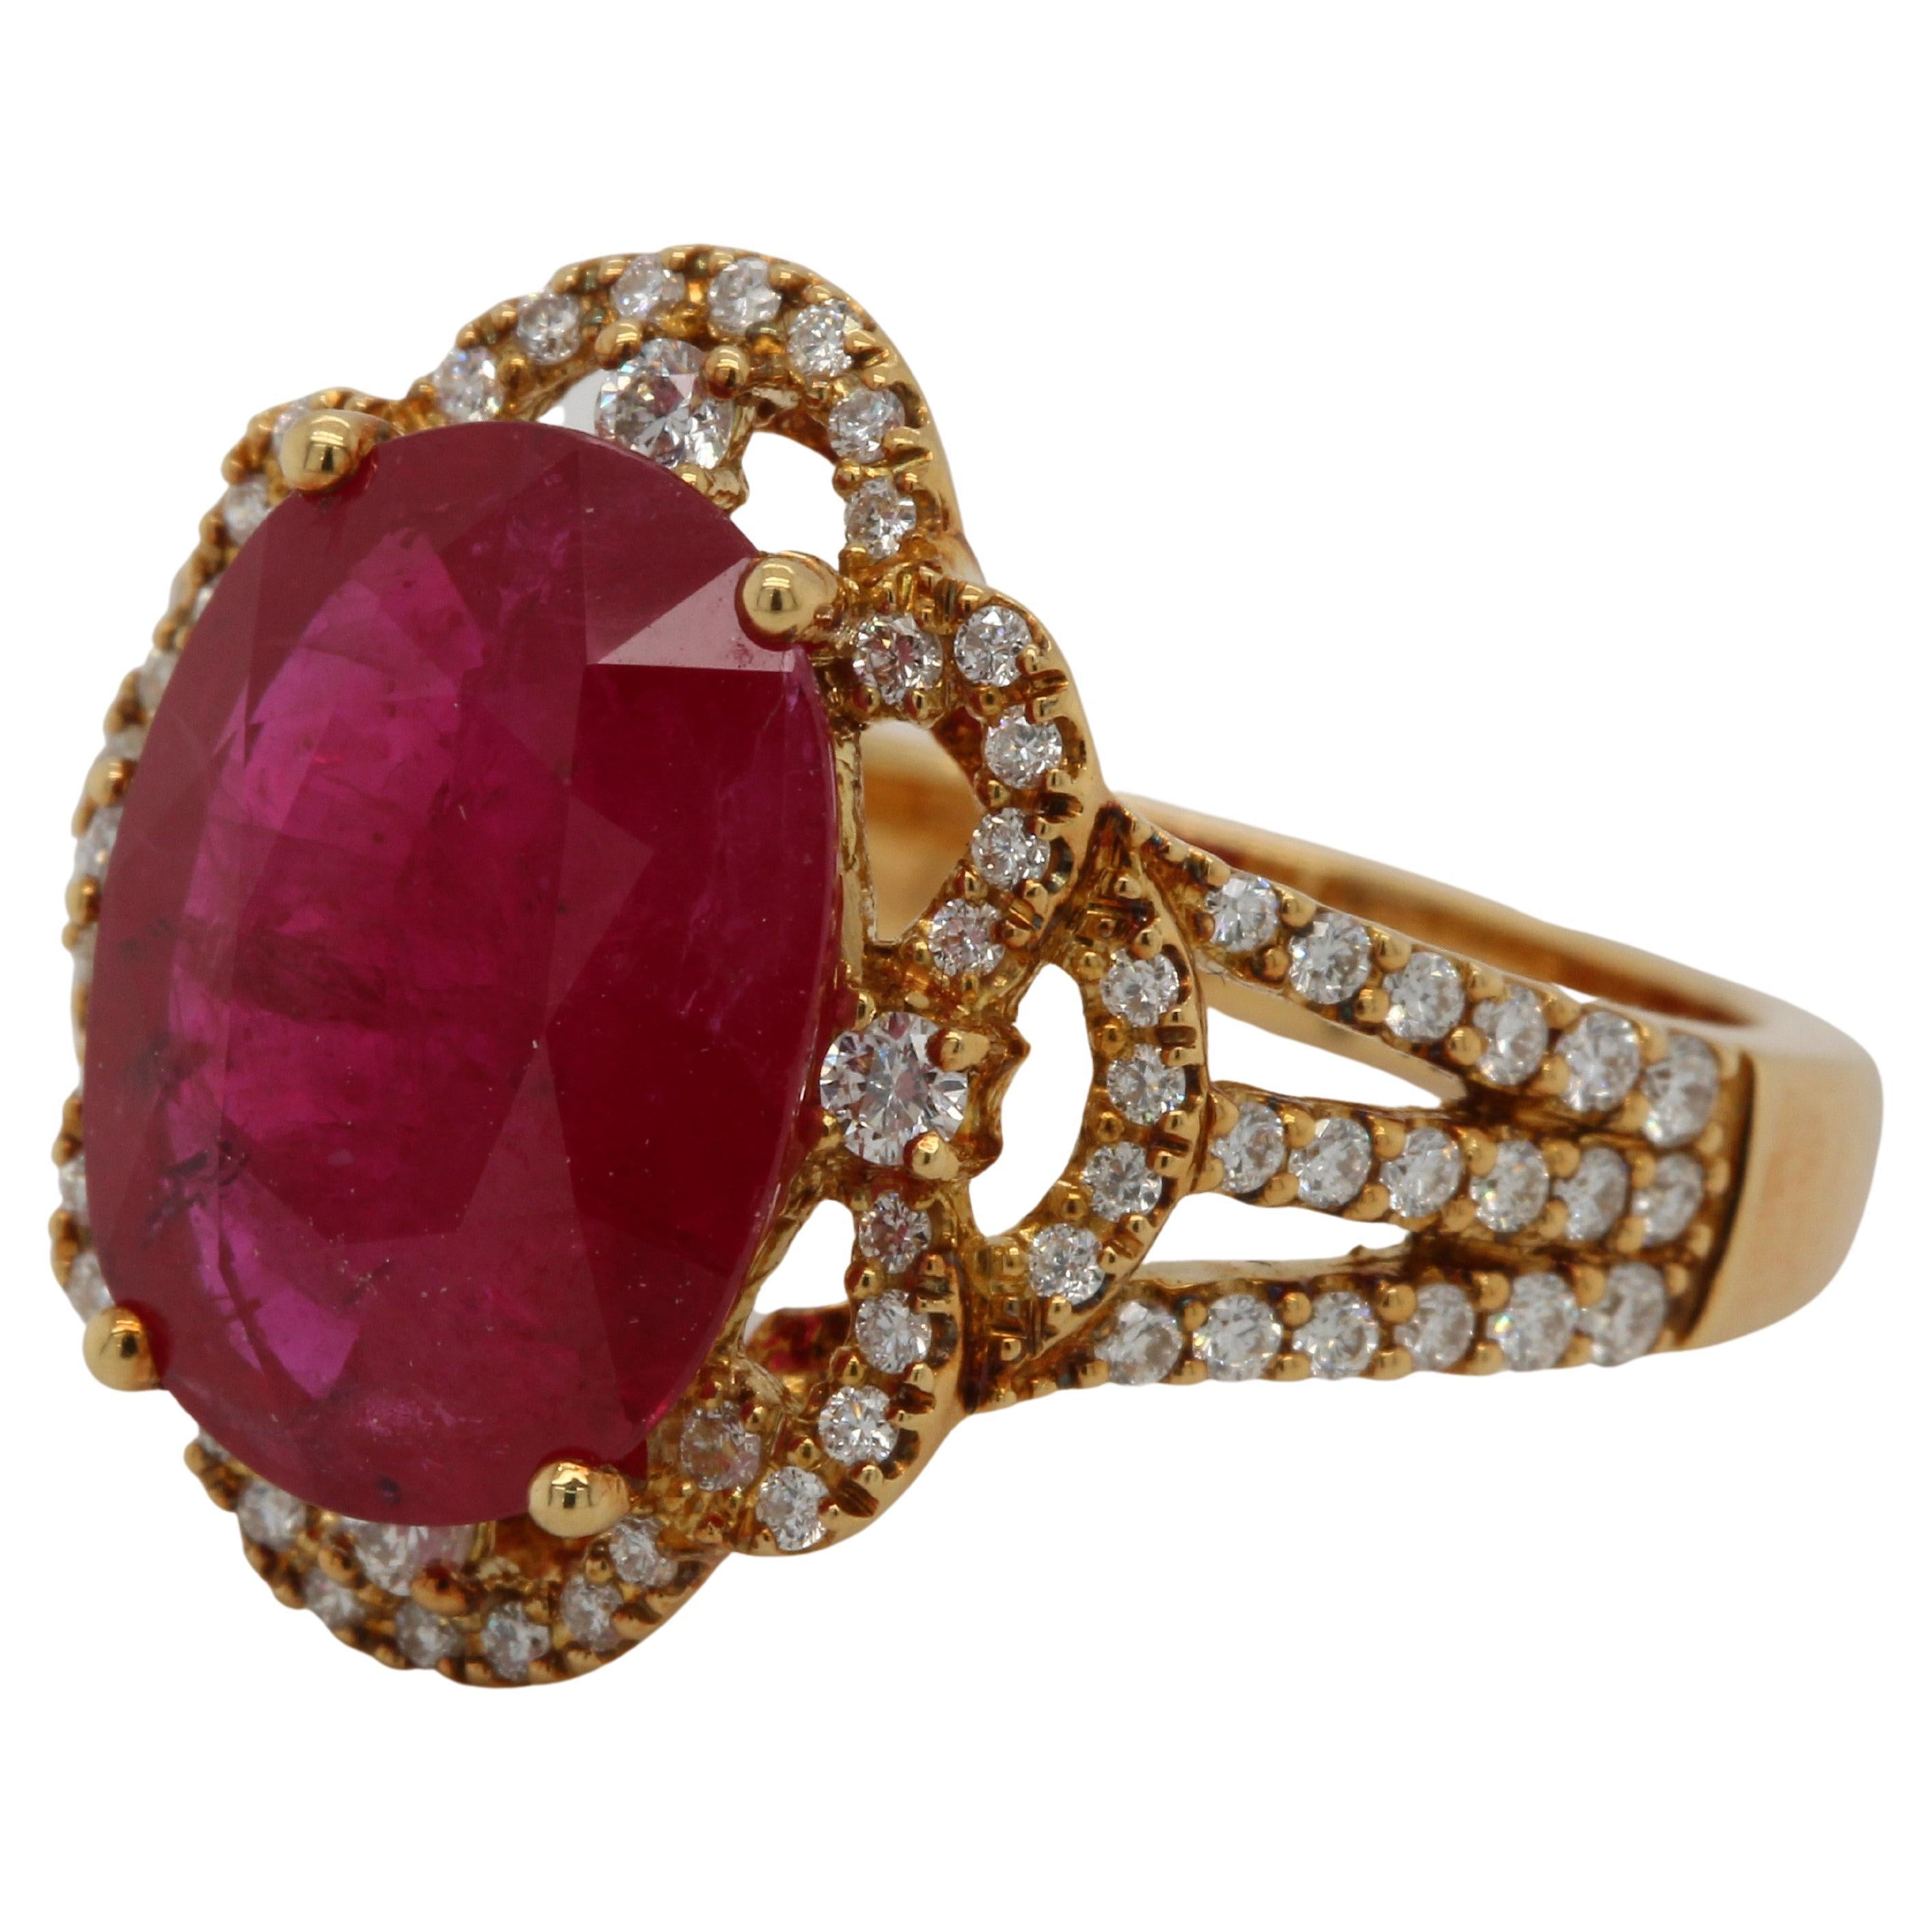 Women's or Men's 5.19 Carat Ruby And Diamond Ring In 18 Karat Gold For Sale